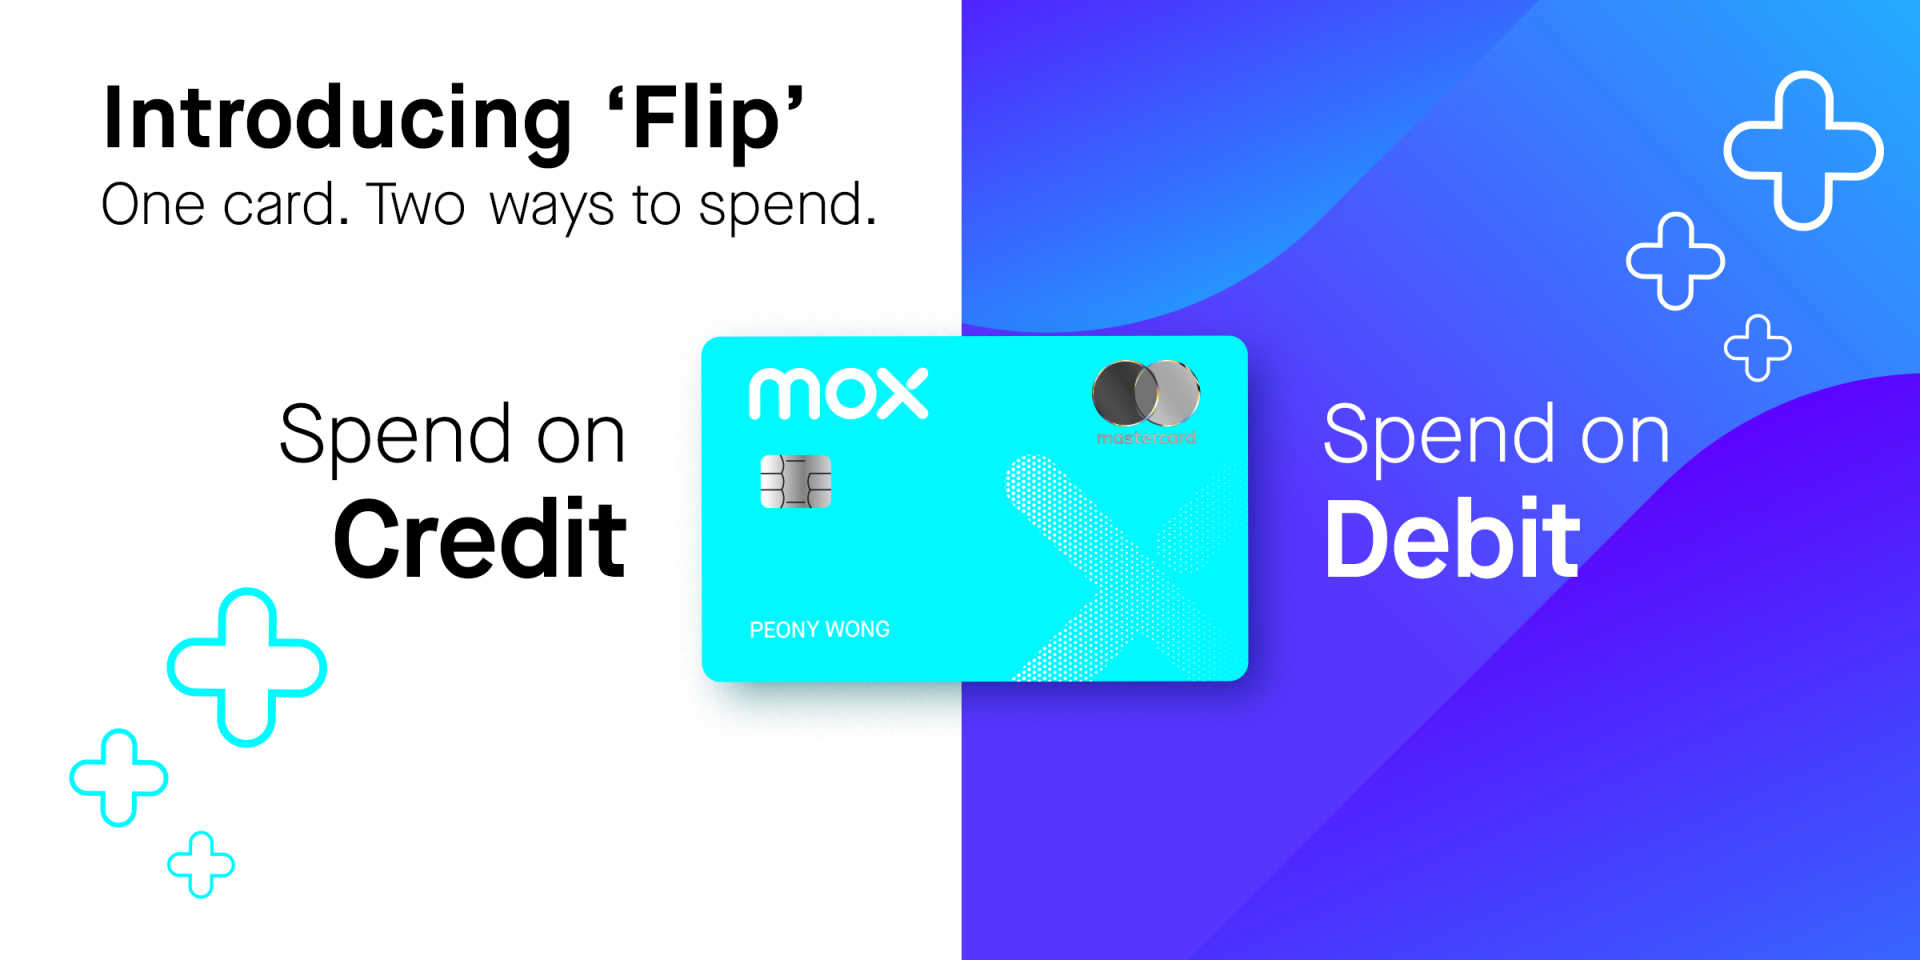 Mox and Mastercard launch groundbreaking feature to “Flip” between debit and credit spending on the all-in-one Mox Card 